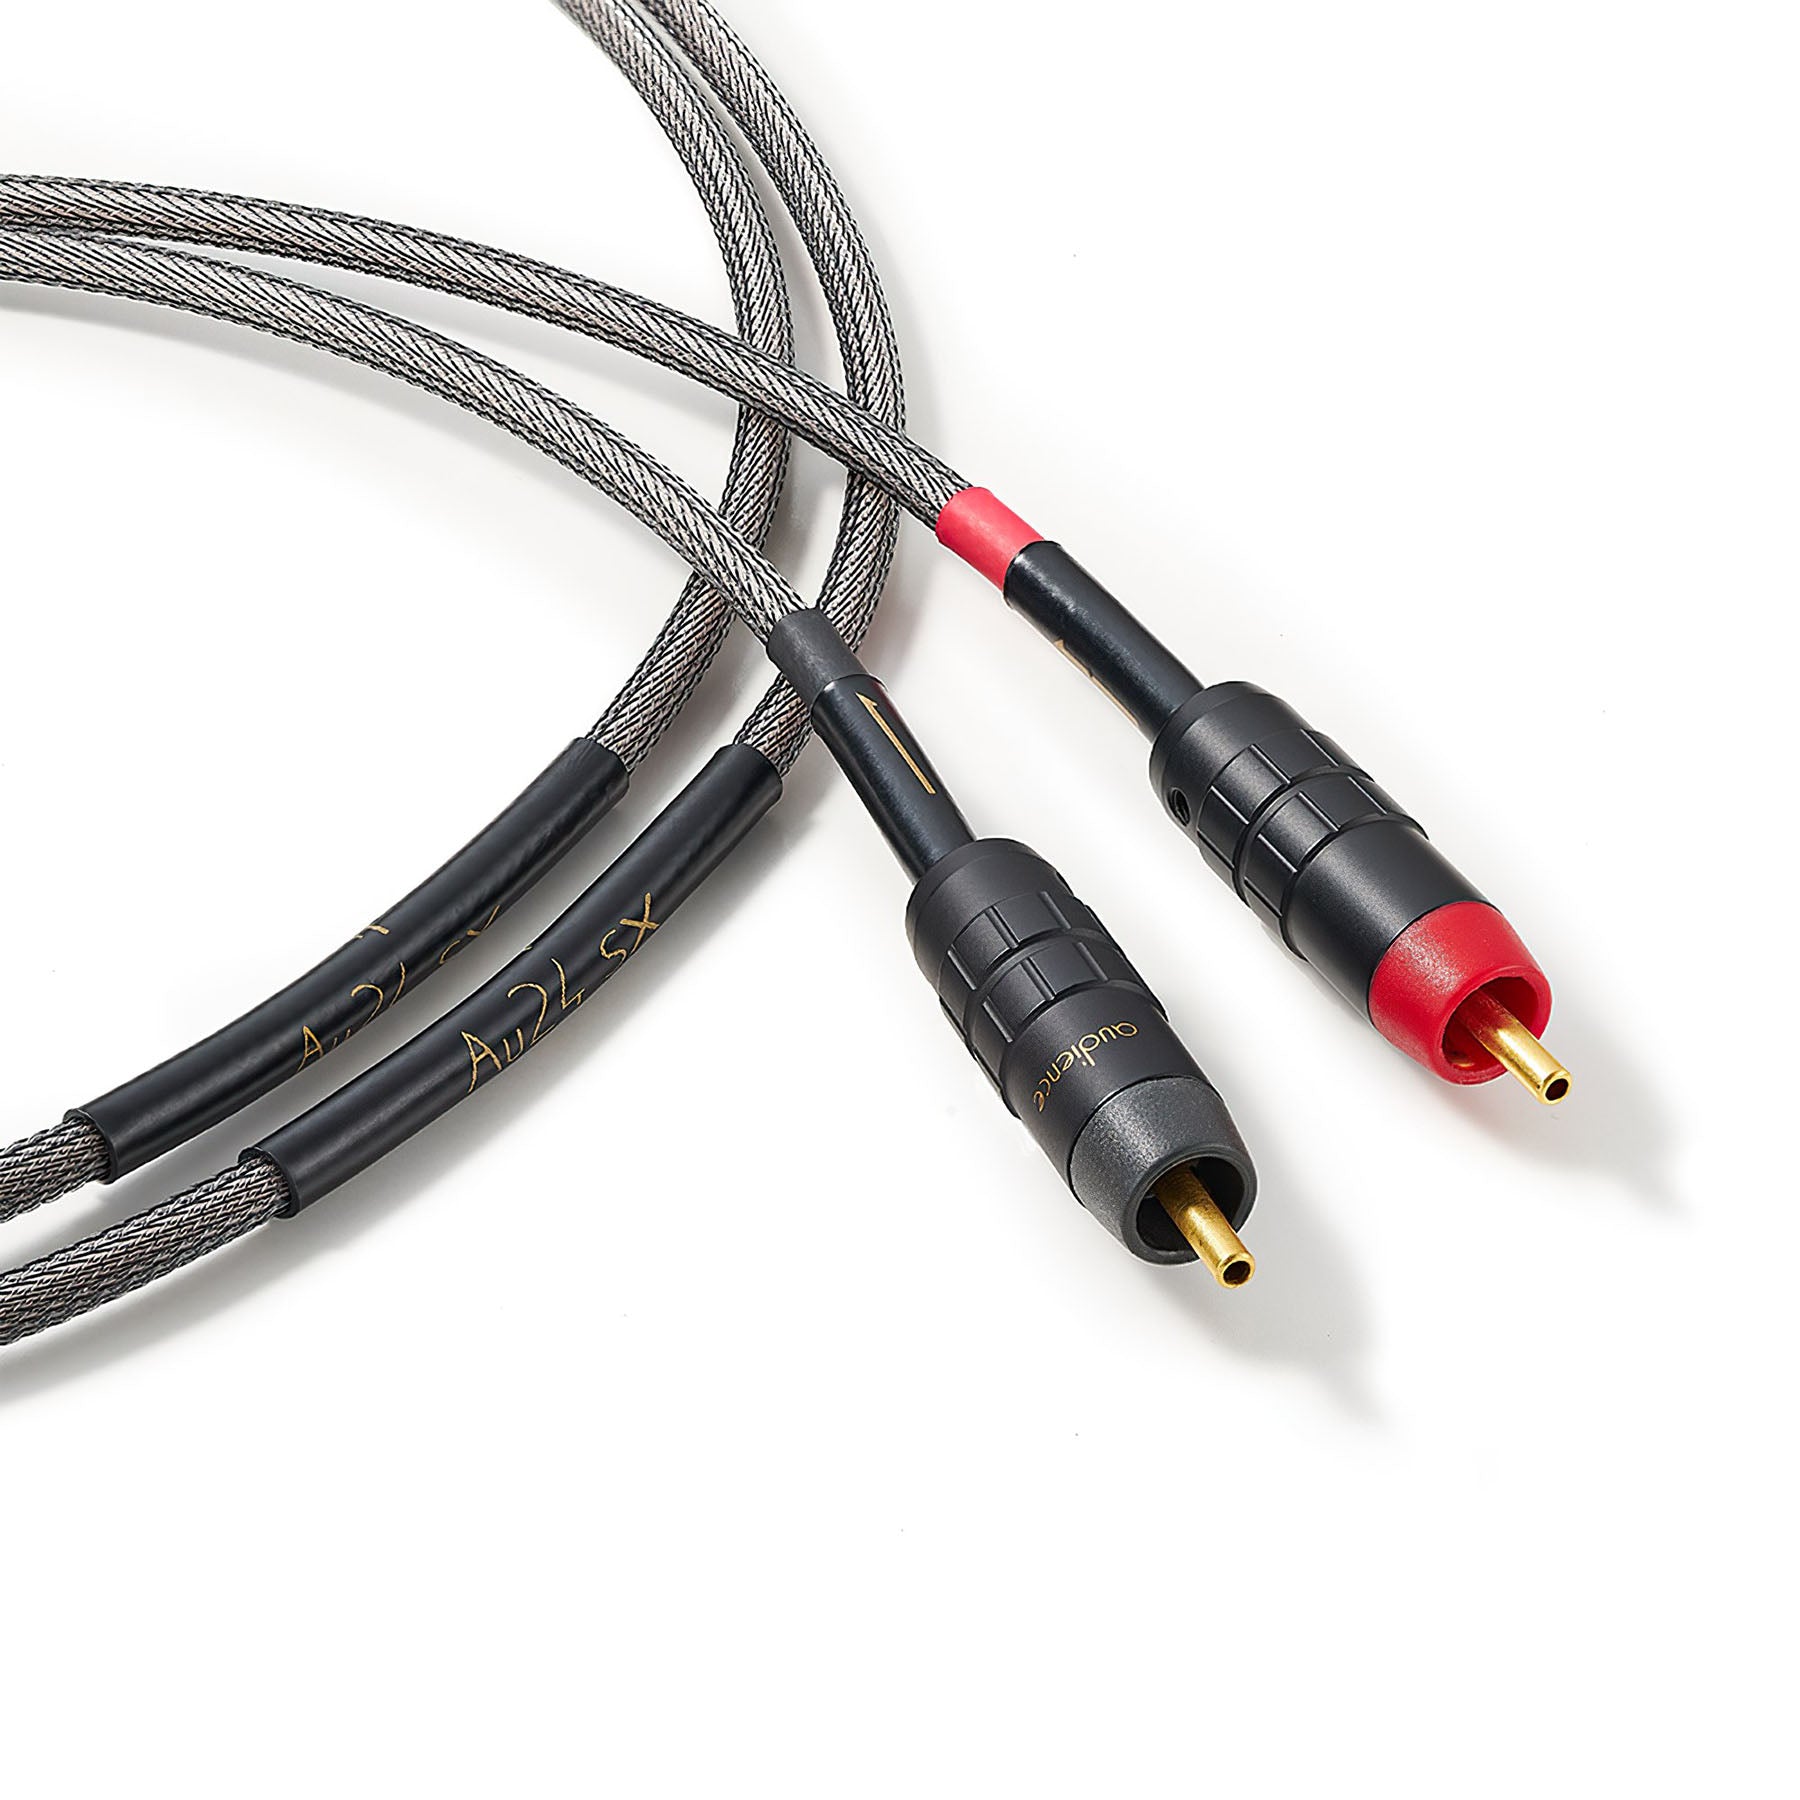 Audience Au24 SX Reference RCA / RCA-DIN Interconnect Cables (pair)